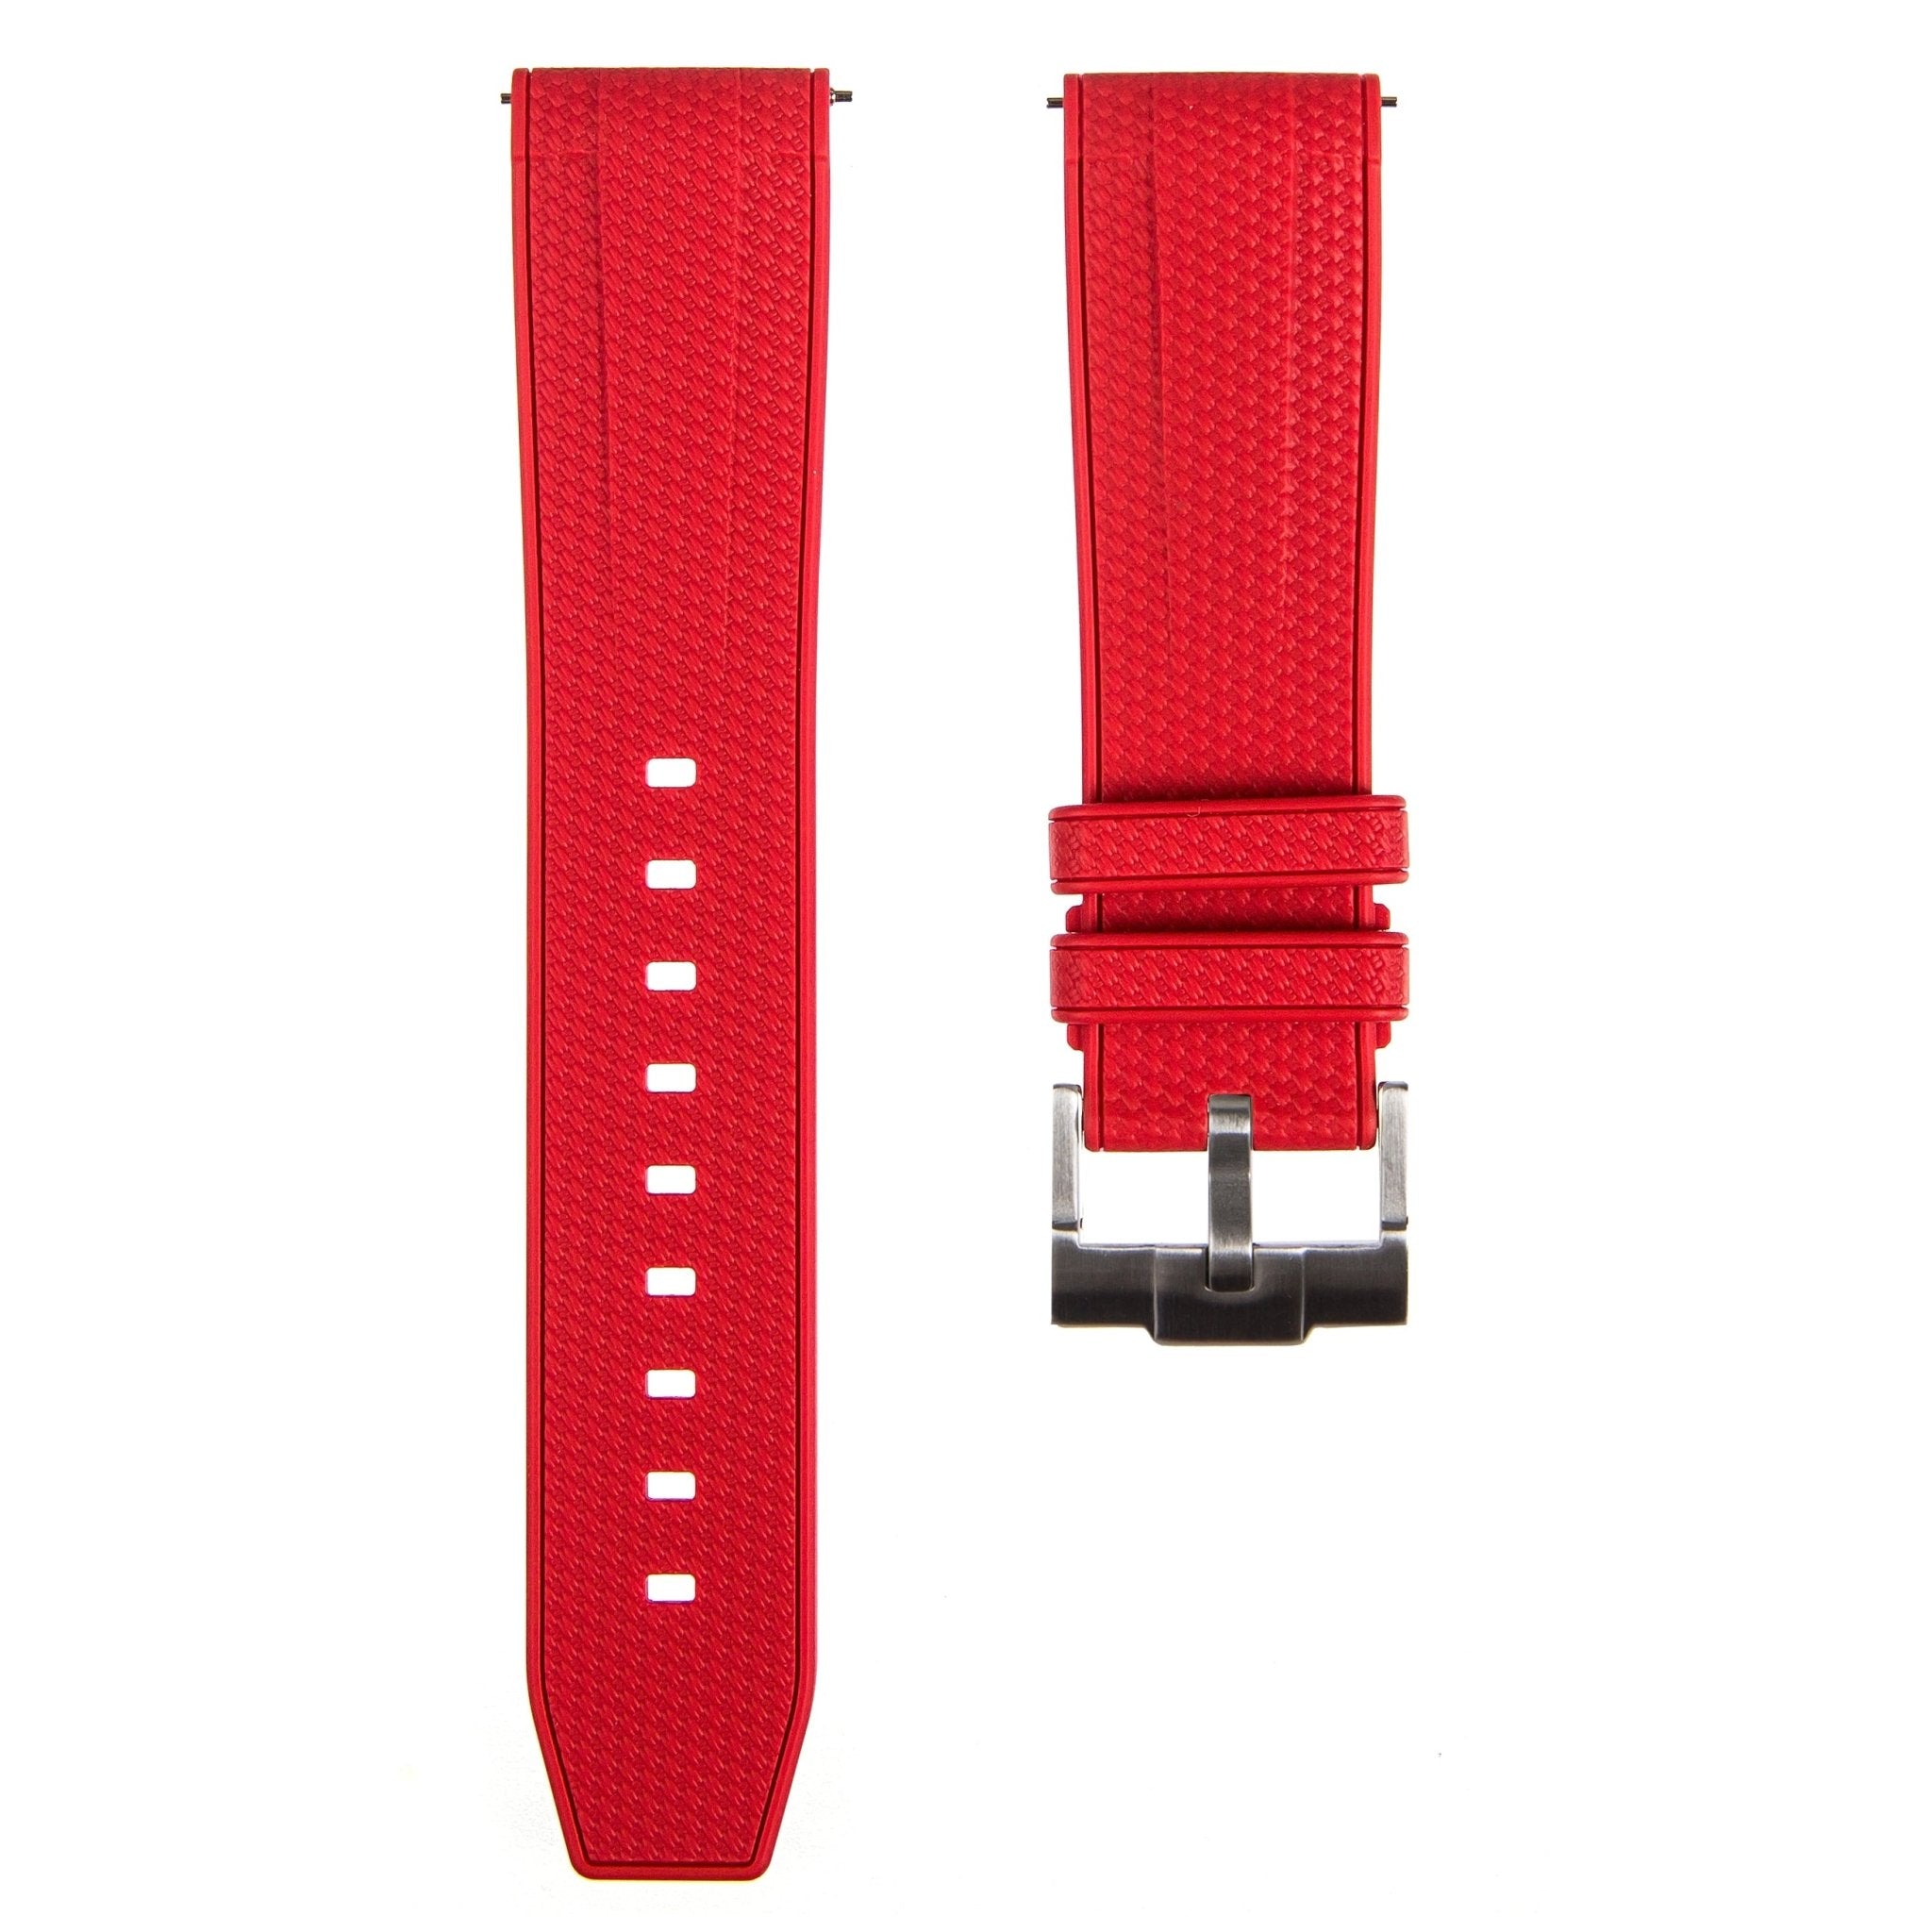 Flexweave Premium SIlicone Rubber Strap - Quick-Release - Compatible with Omega x Swatch – Red (2423) -Strapseeker